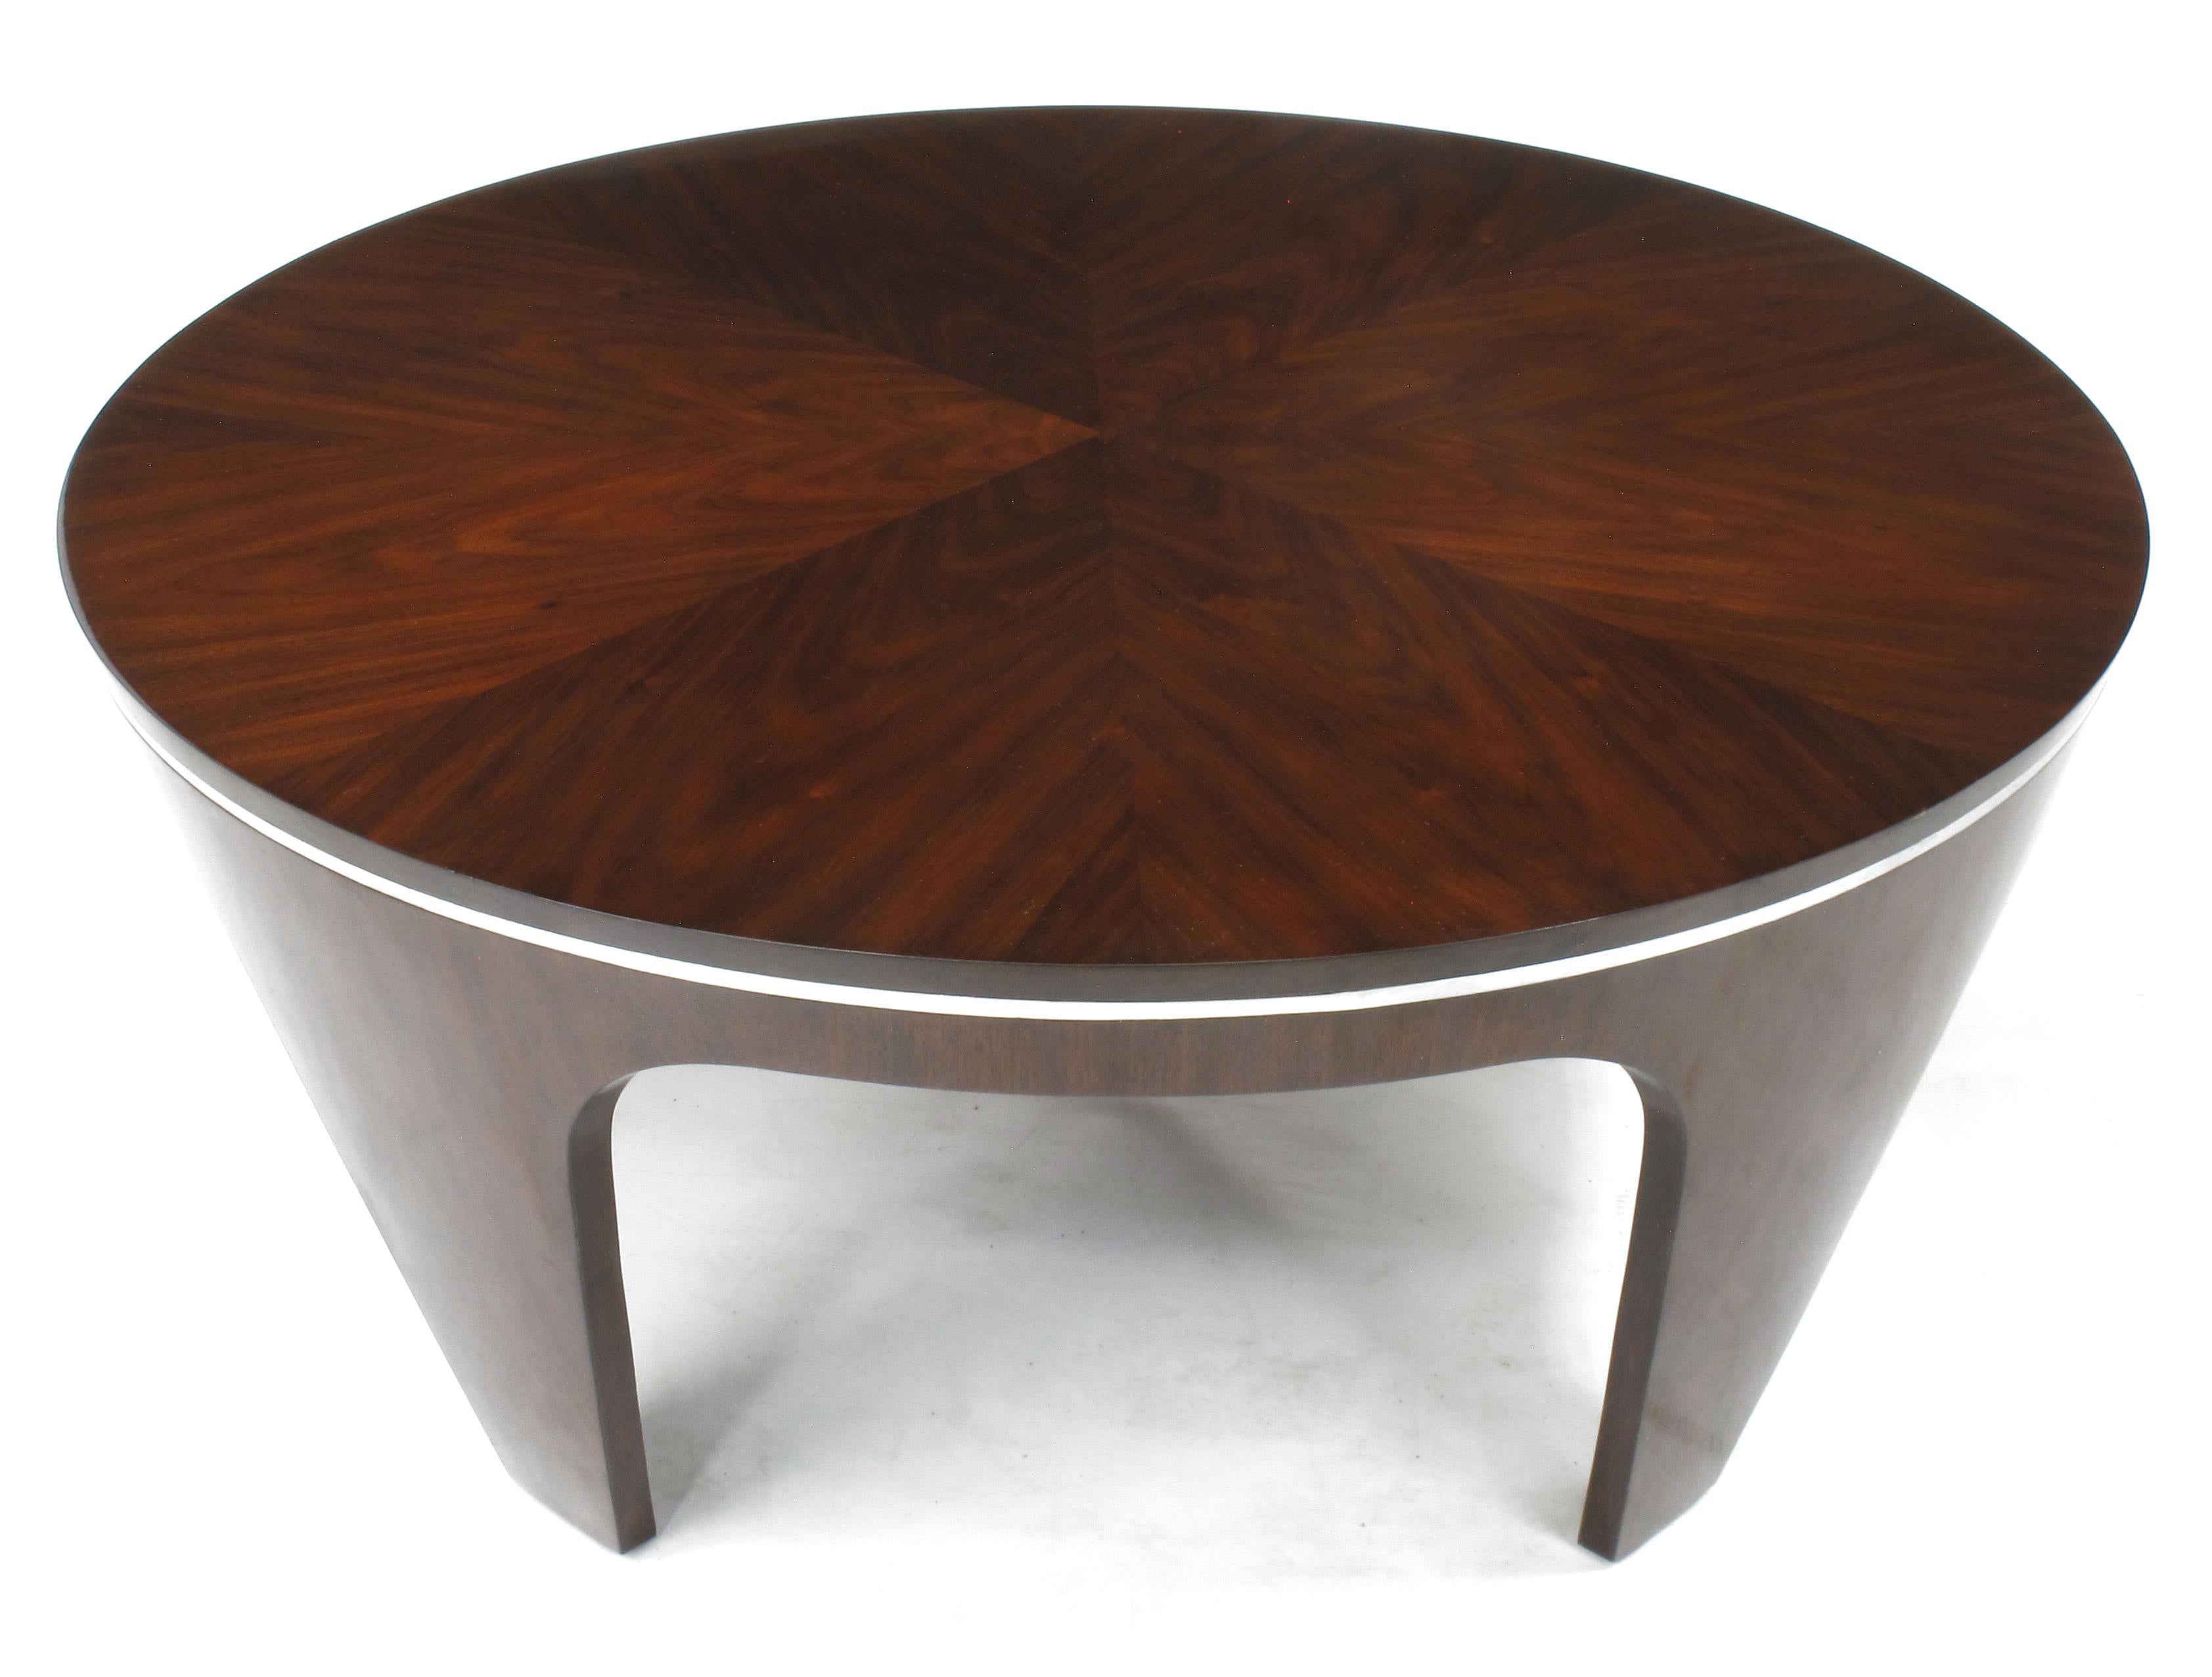 Art Deco inspired high gloss mahogany coffee table with chrome banding accent and parquetry top. Most likely of Italian origin, the sculptural legs are tapered inward creating a striking Silhouette. Comes with a protective glass top to keep the